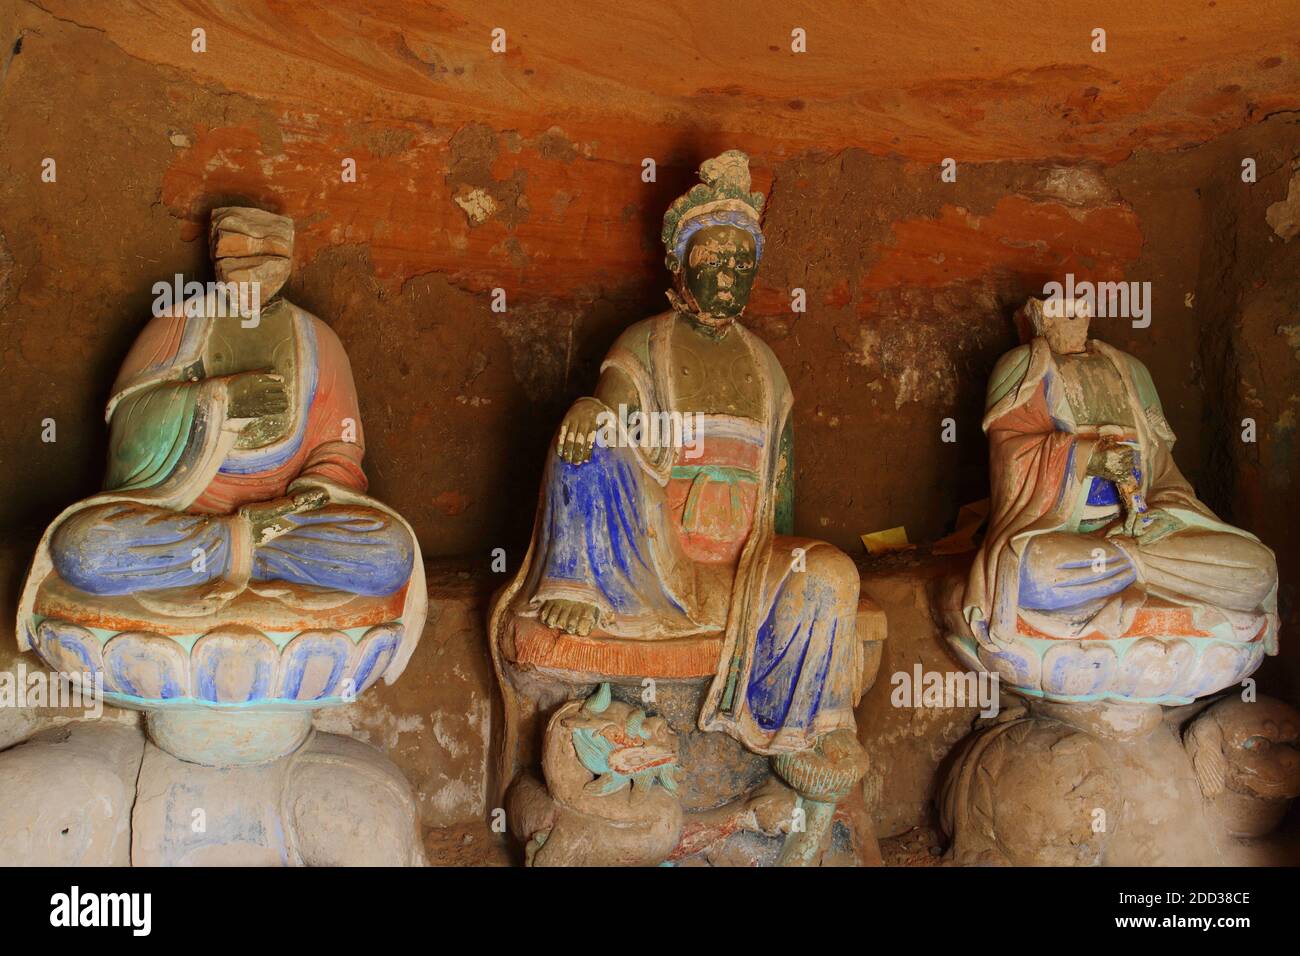 Jingchuan county in gansu province south cave temple Stock Photo